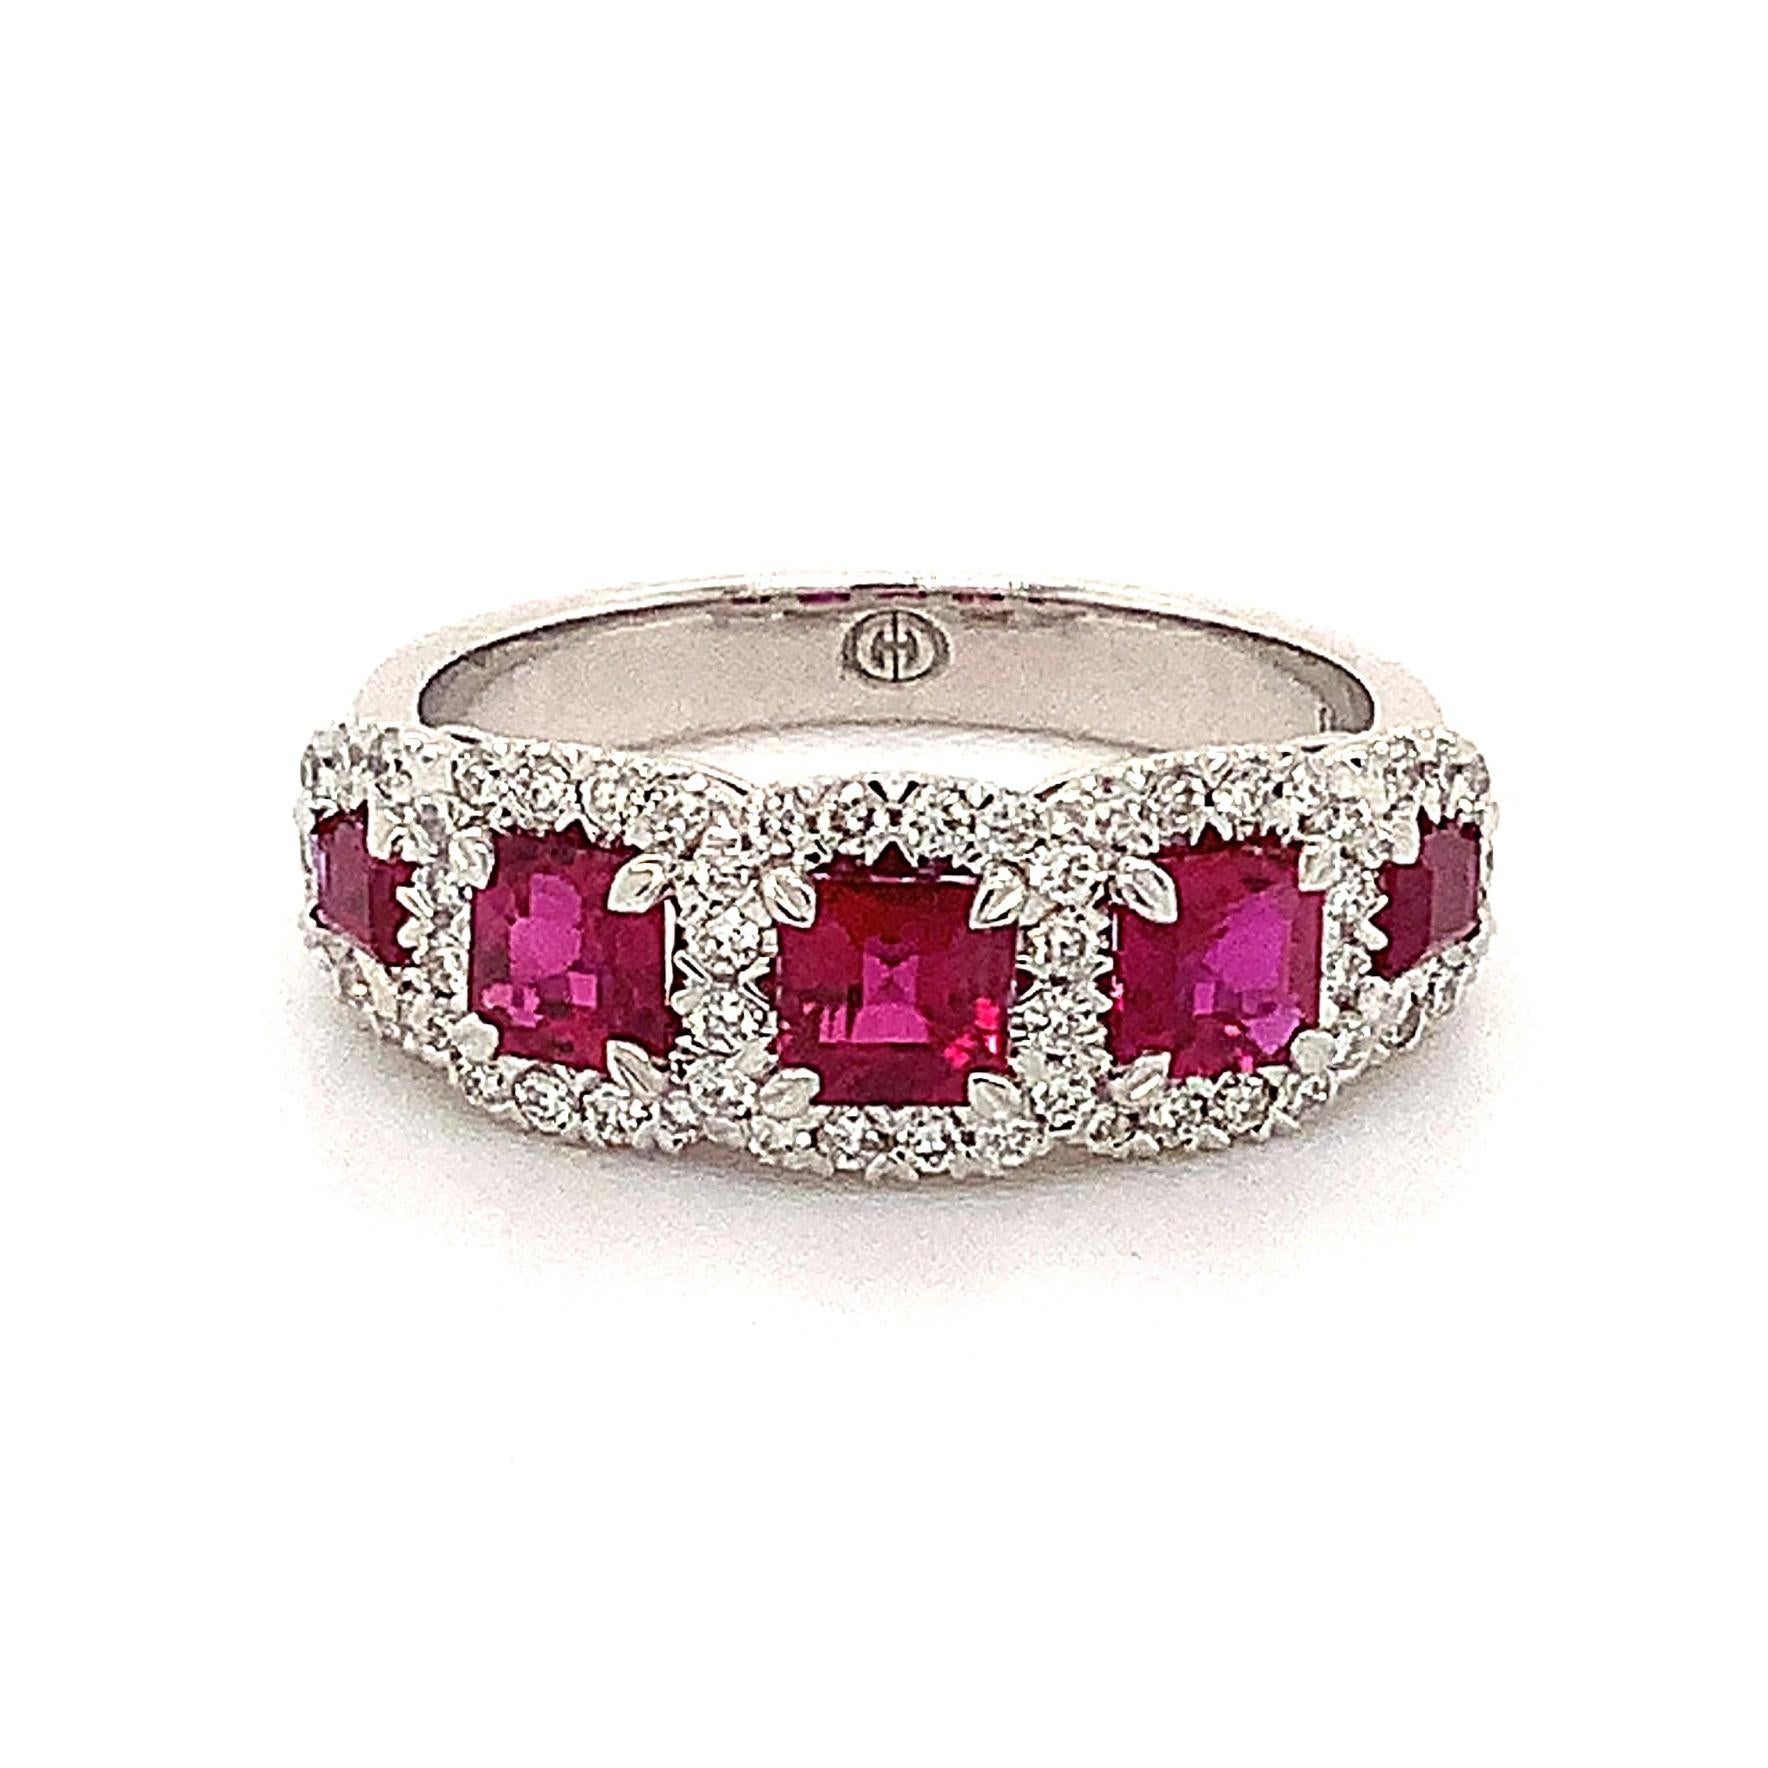 Christopher Designs Vivid Red  Burmese Ruby Ring with Diamond Halo in 18Kt White Gold. This is one of a Kind and Very Pretty.
5 Ruby = 1.41ctw  Dark intense Medium Red Color and excellent Saturation.
Ascher Square Cut and Baguette Cut
Gem